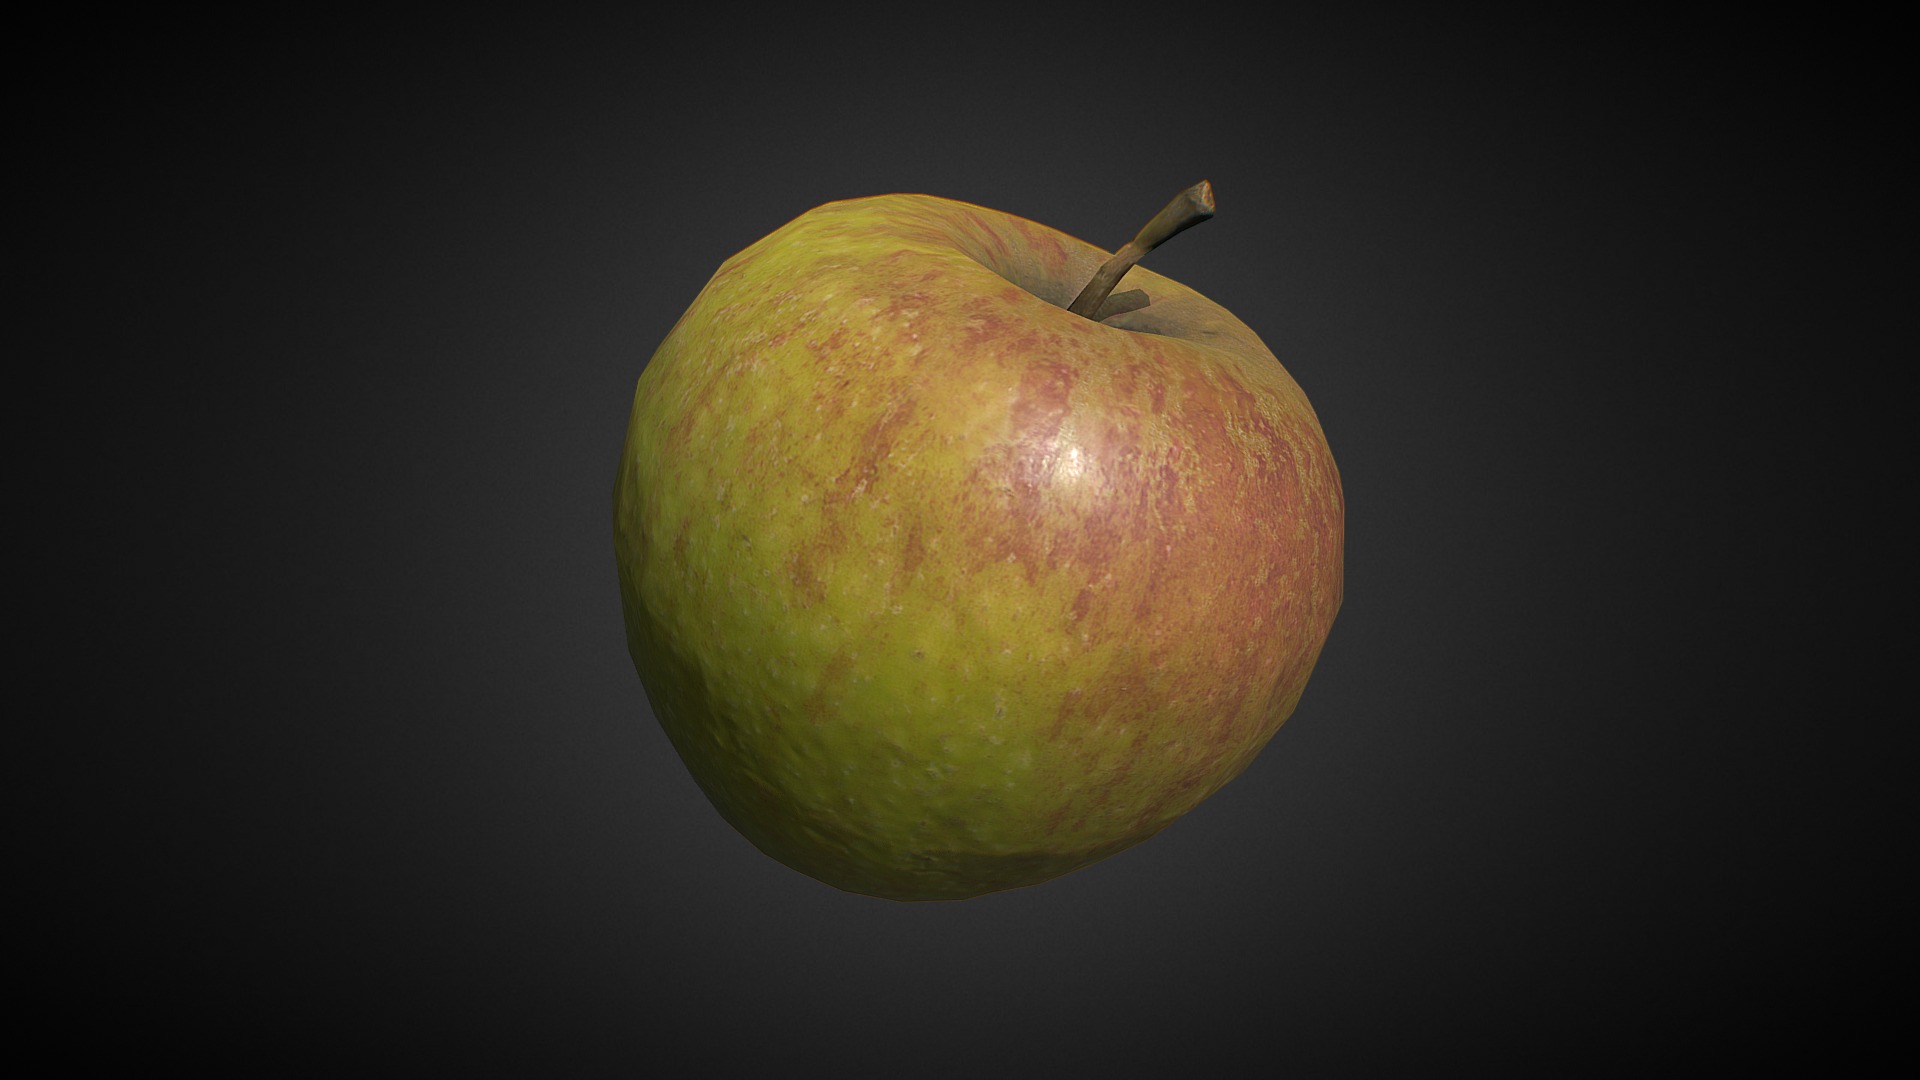 3D model Cox’s Orange Pippin apple lowpoly photogrammetry - This is a 3D model of the Cox's Orange Pippin apple lowpoly photogrammetry. The 3D model is about a close up of a fruit.